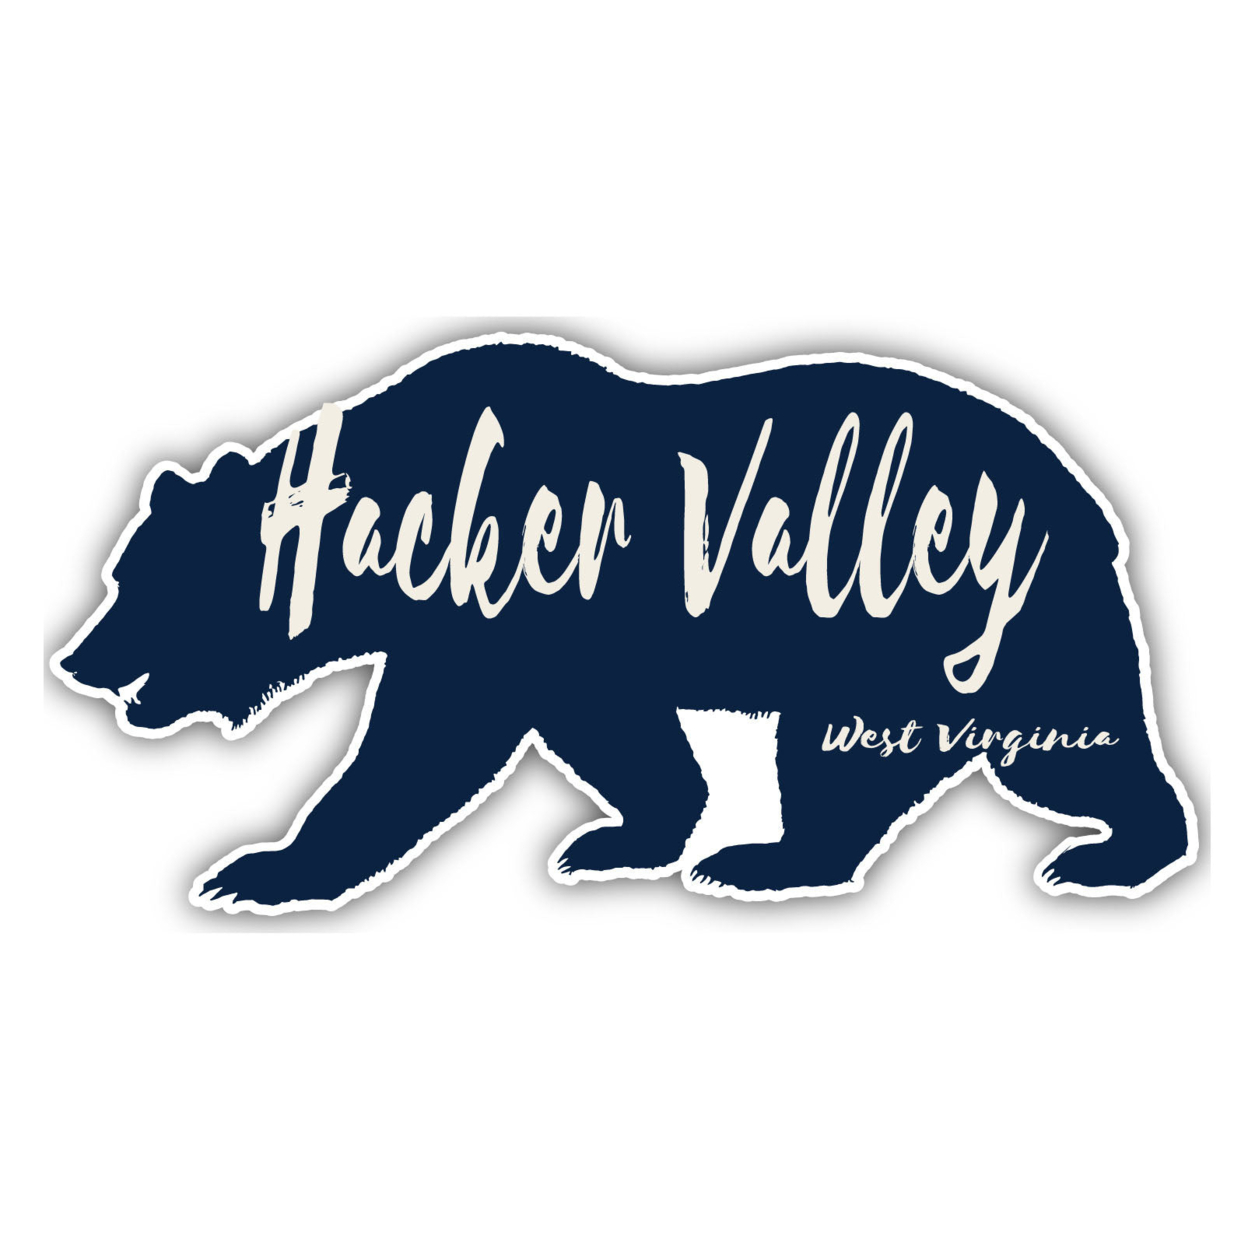 Hacker Valley West Virginia Souvenir Decorative Stickers (Choose Theme And Size) - 4-Pack, 10-Inch, Great Outdoors